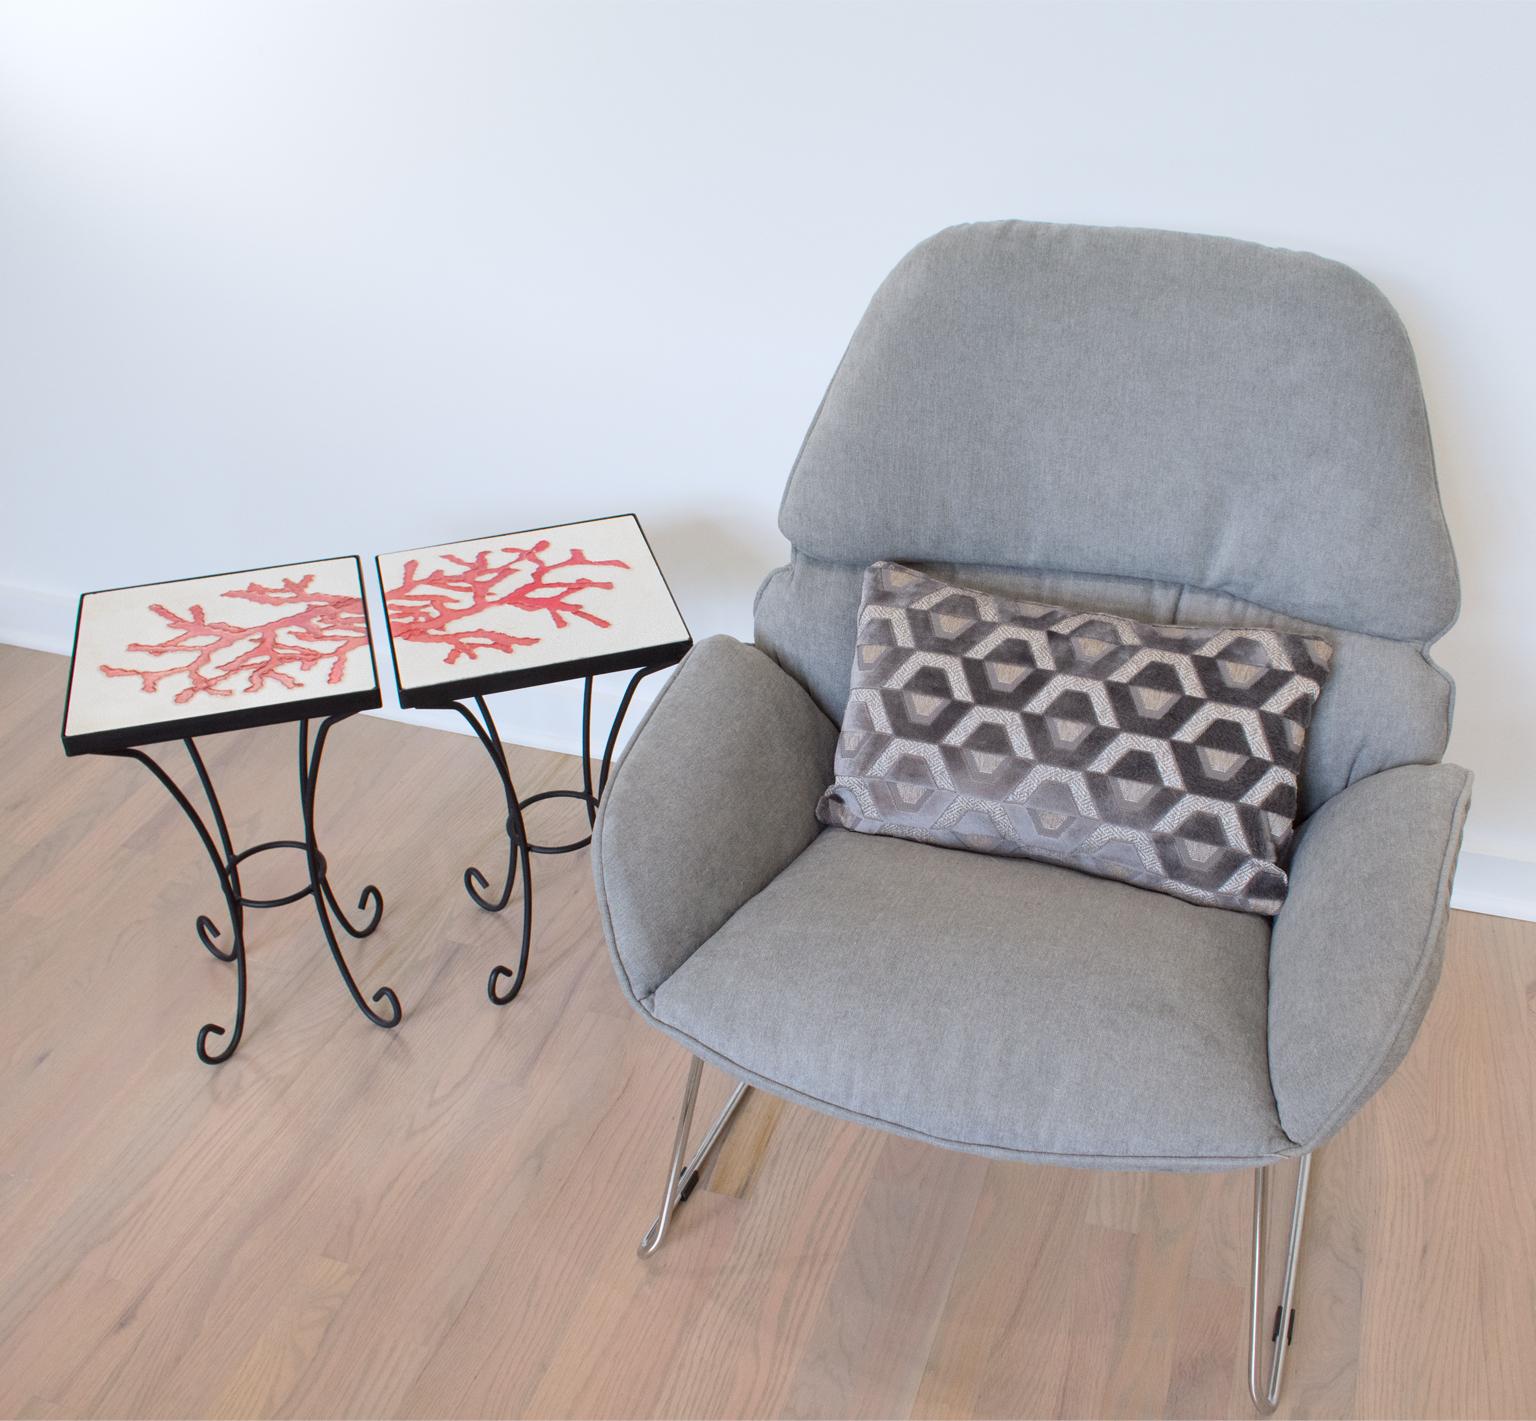 Wrought Iron and Ceramic Tile Side Coffee Table, a pair, 1950s For Sale 10